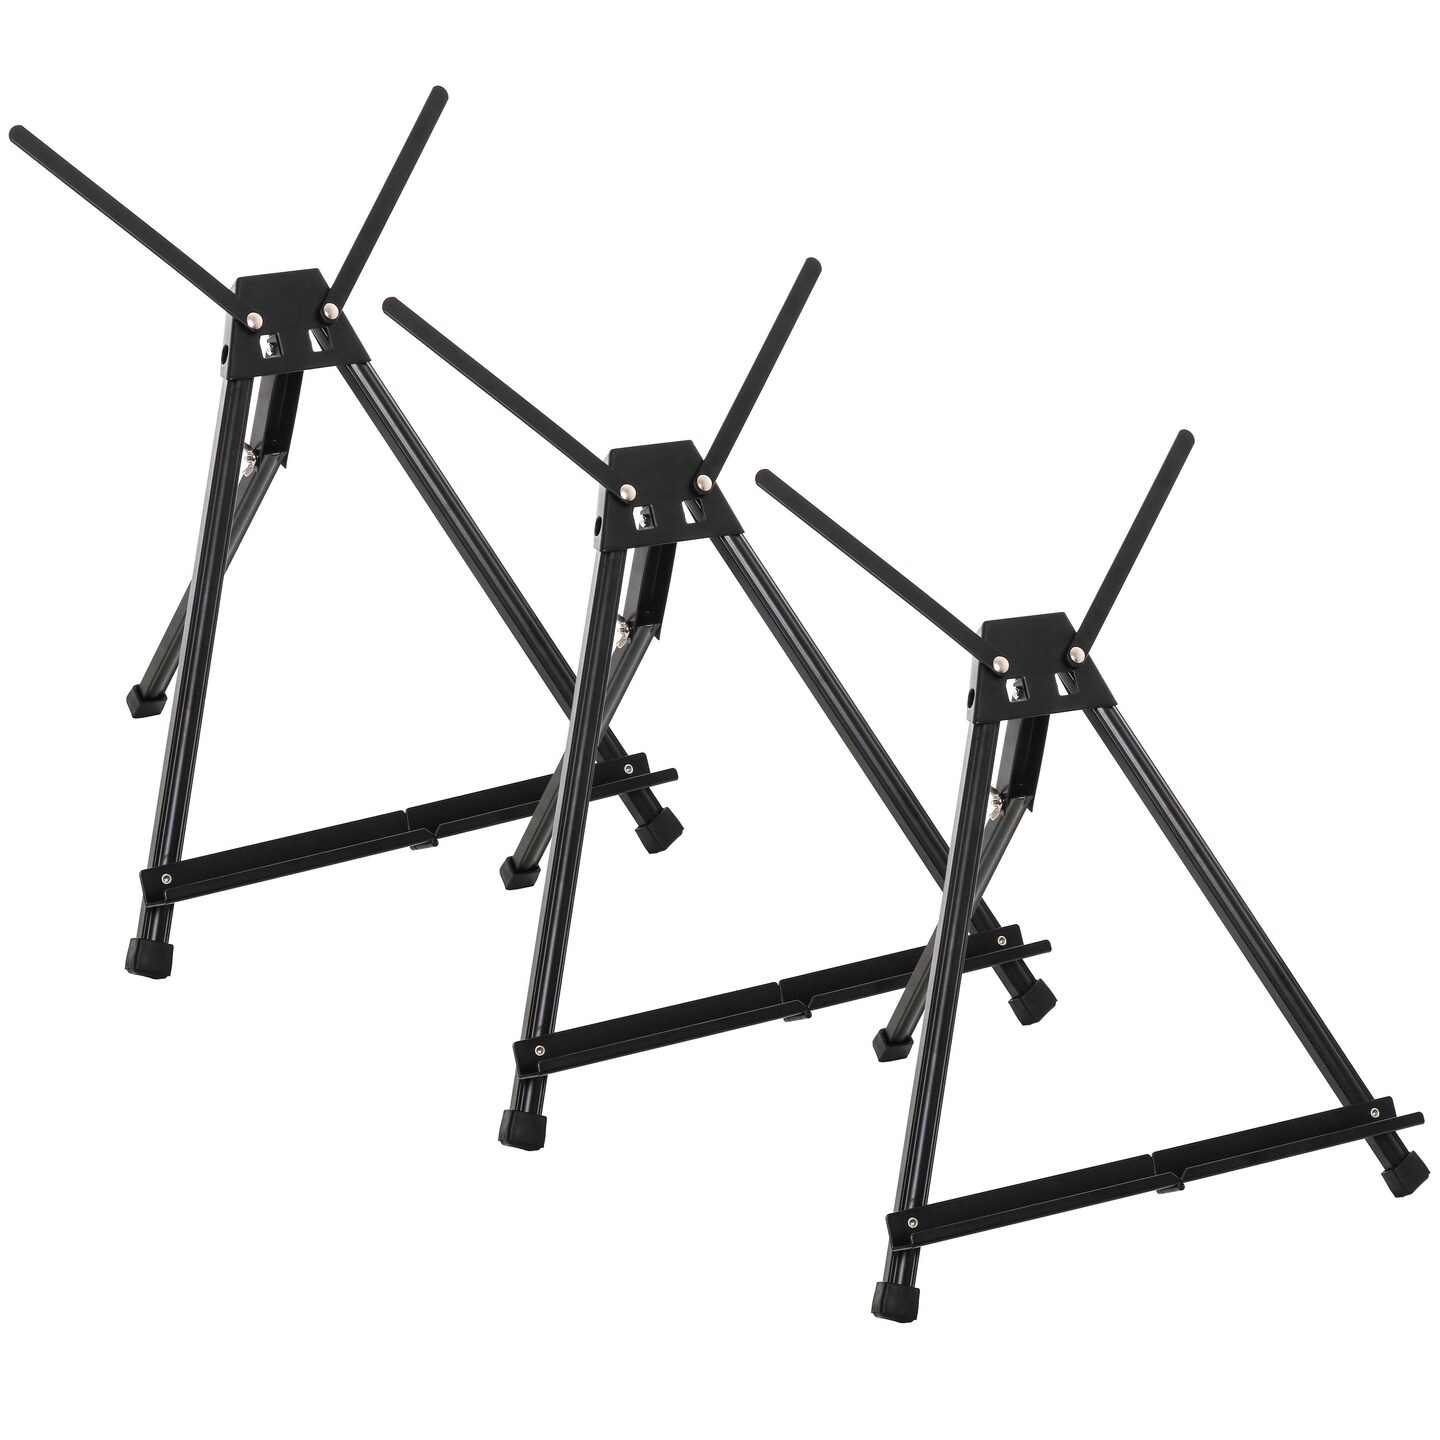 15&#x22; to 21&#x22; High Adjustable Black Aluminum Tabletop Display Easel (Pack of 3) - Portable Artist Tripod Stand with Extension Arm Wings, Folding Frame